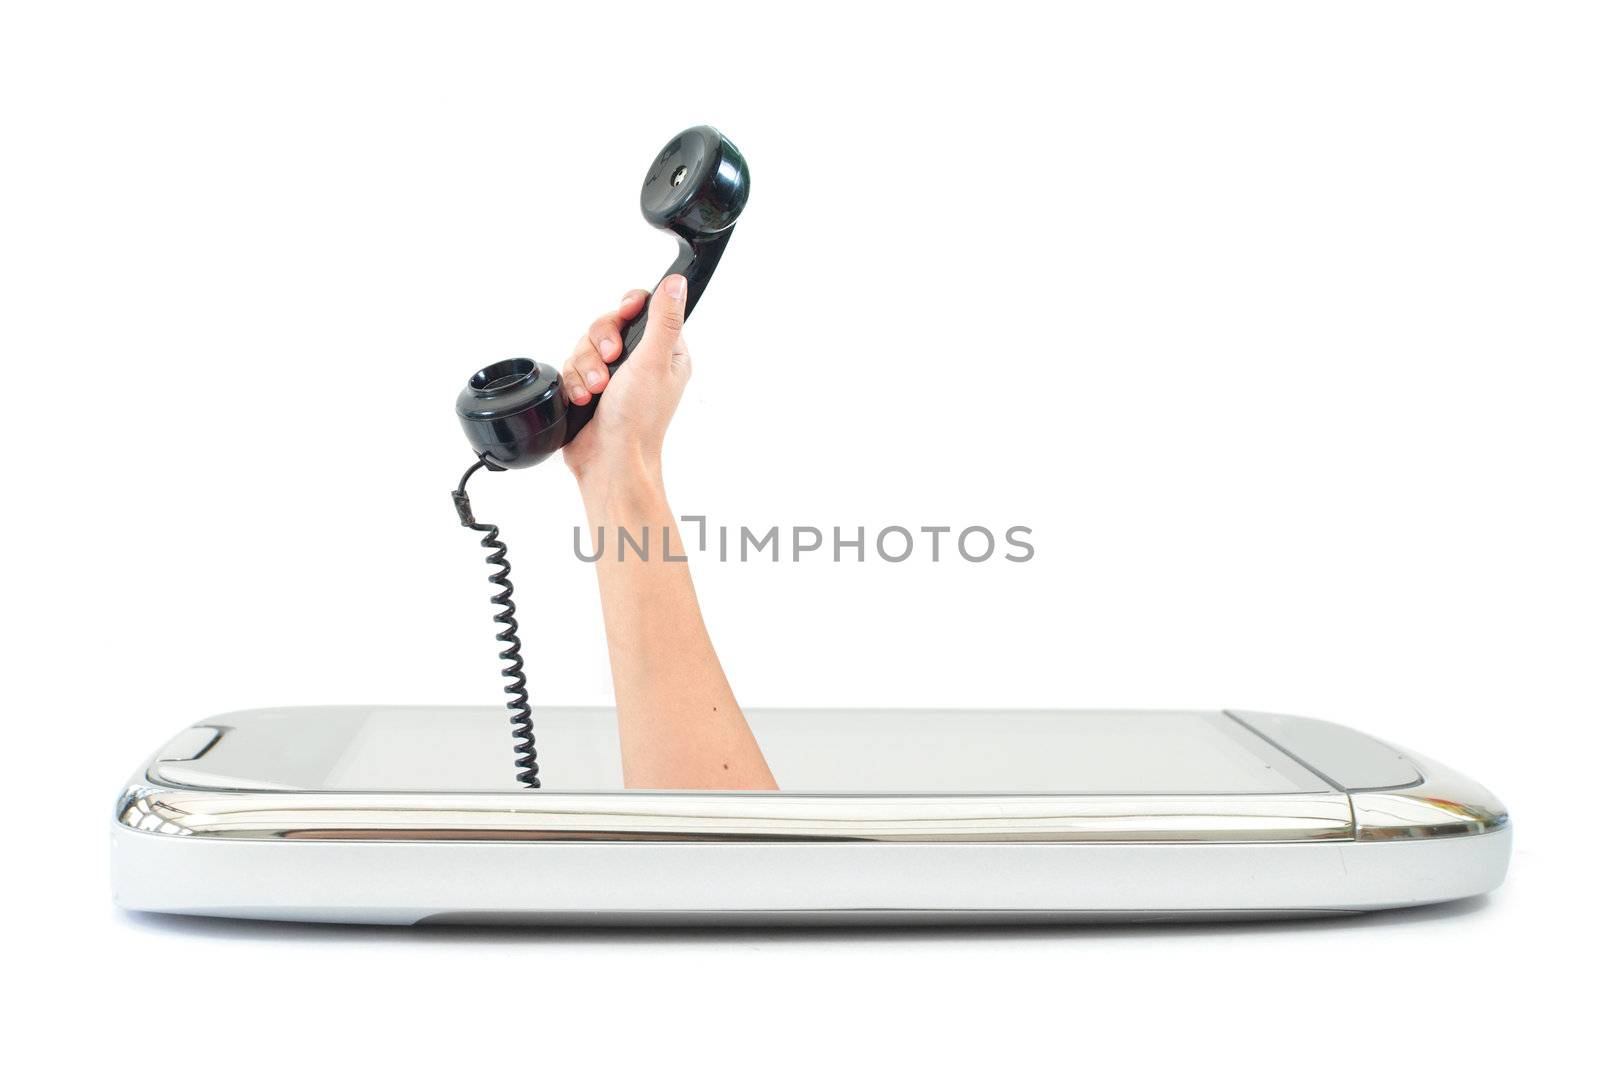 Hand holding a telephone receiver from a mobile cell phone